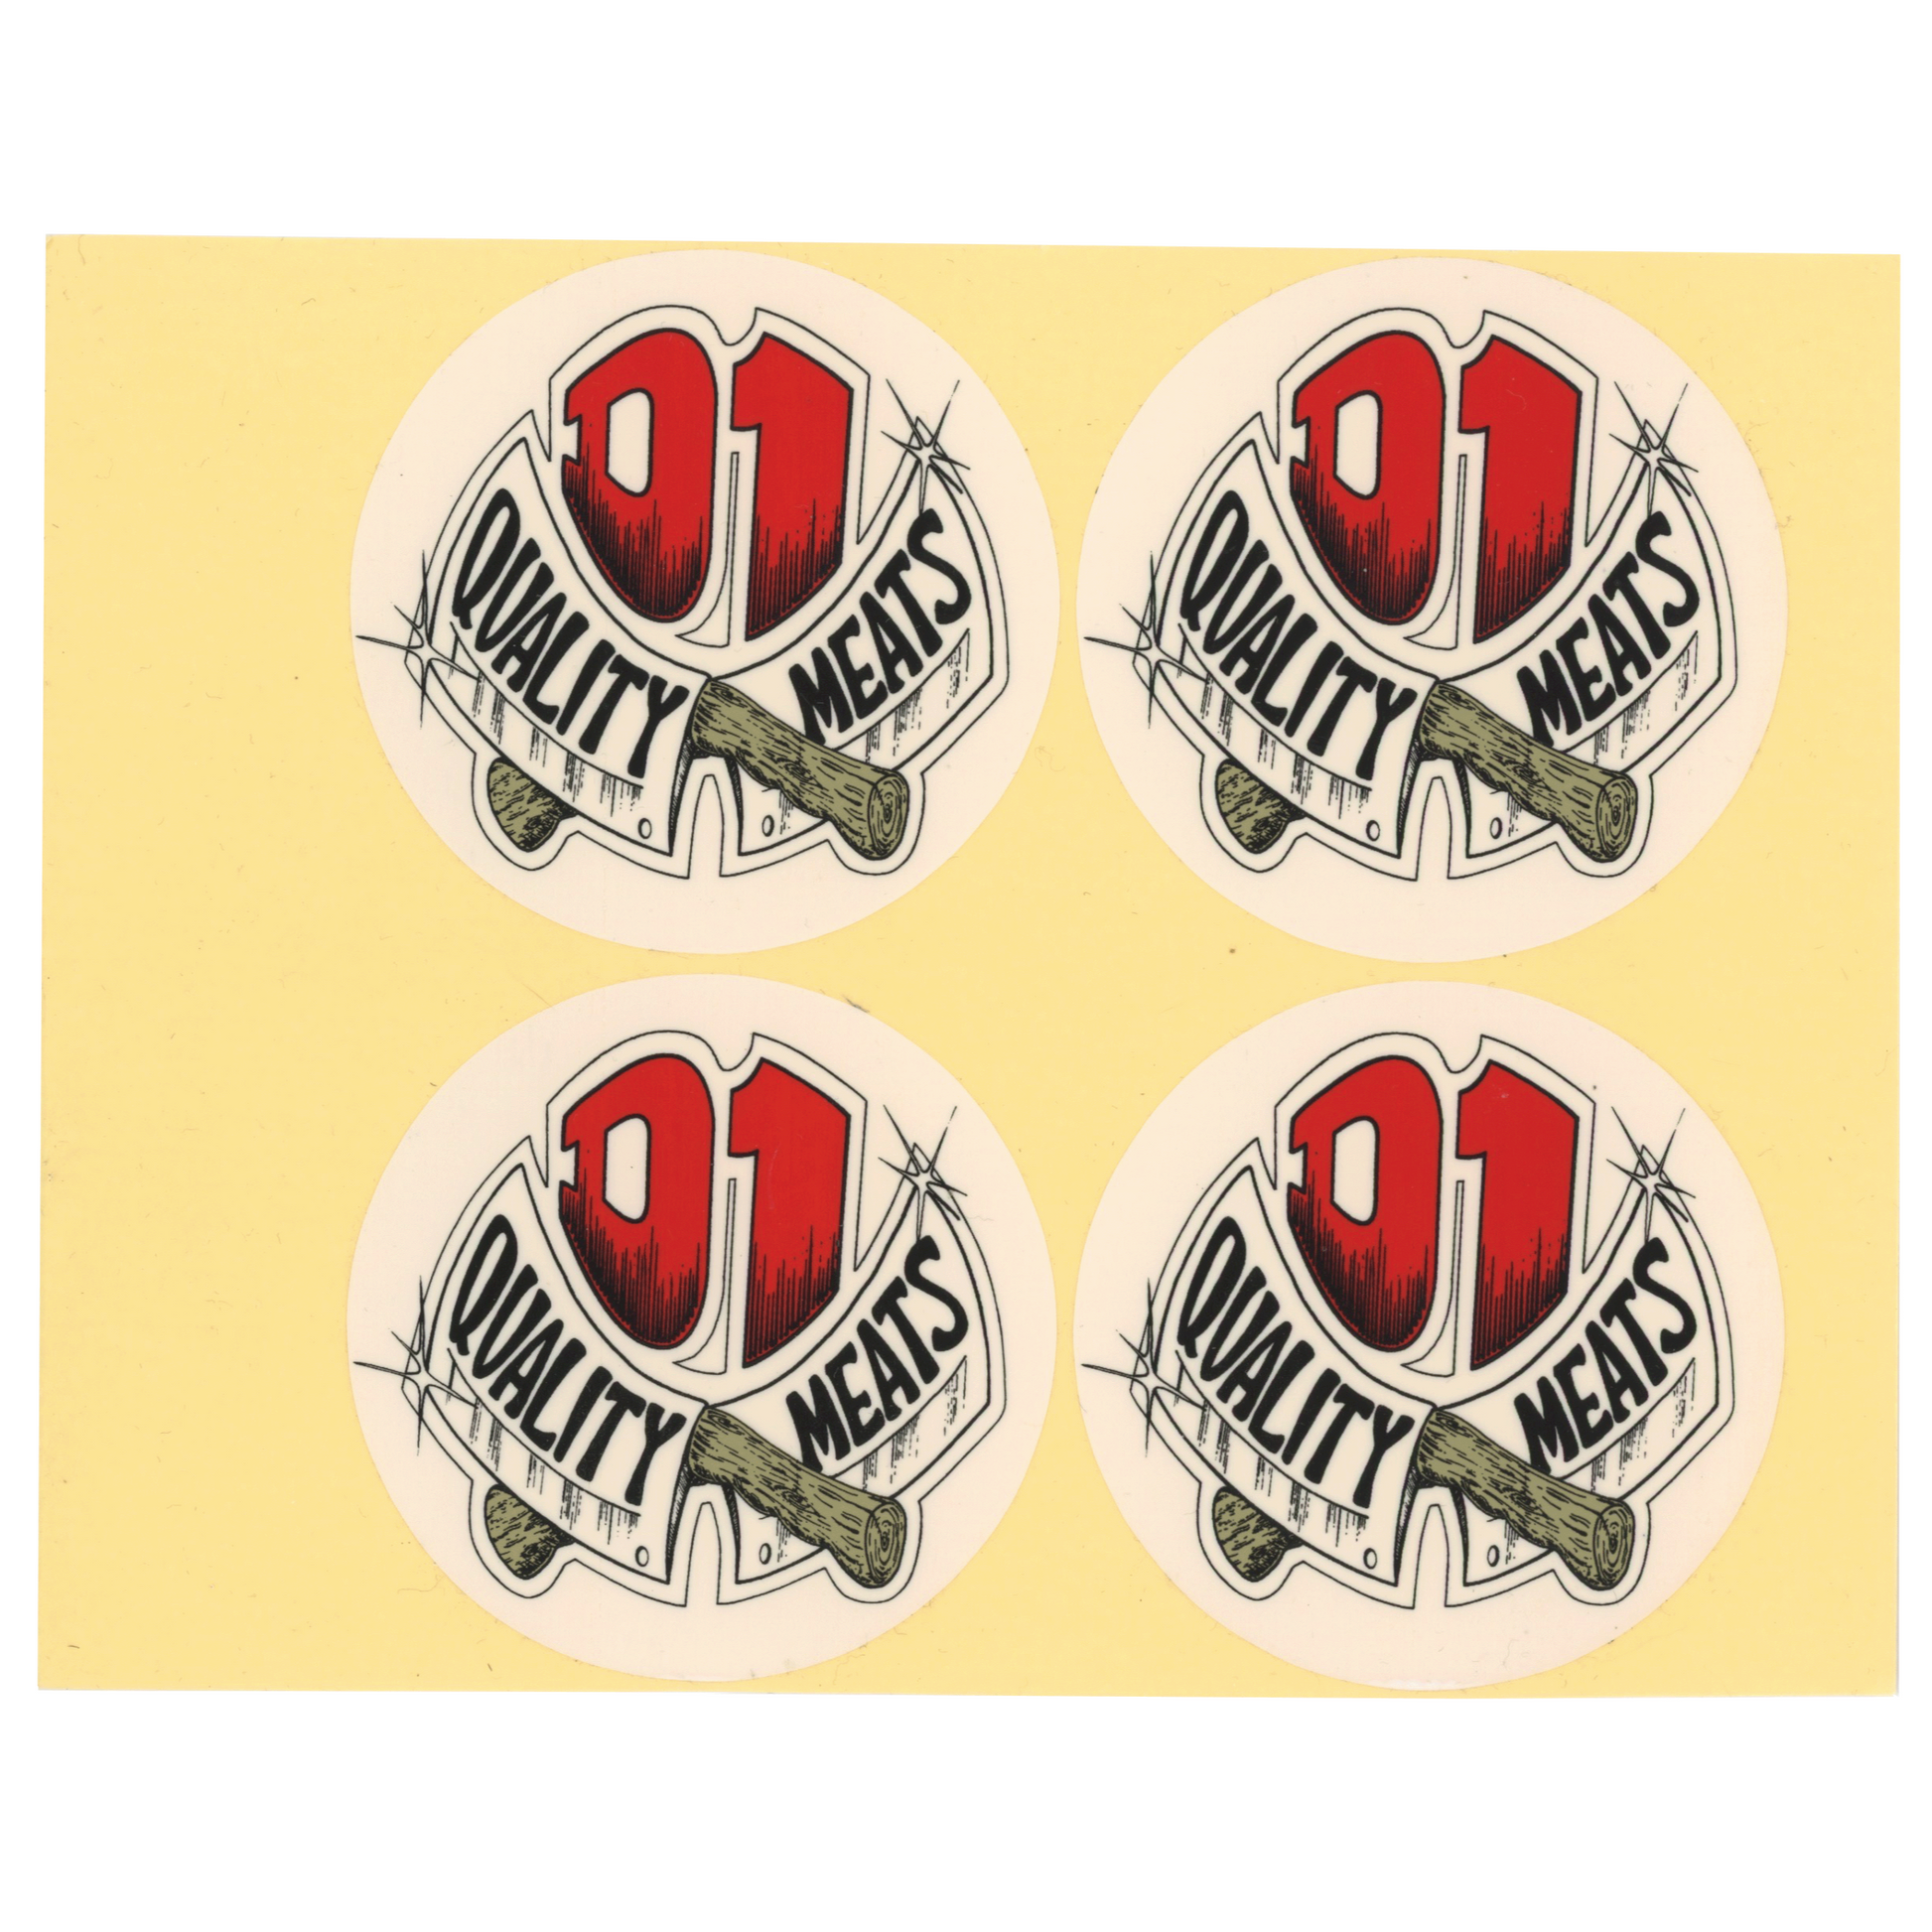 D1 Daves Quality Meats butcher knife stickers.